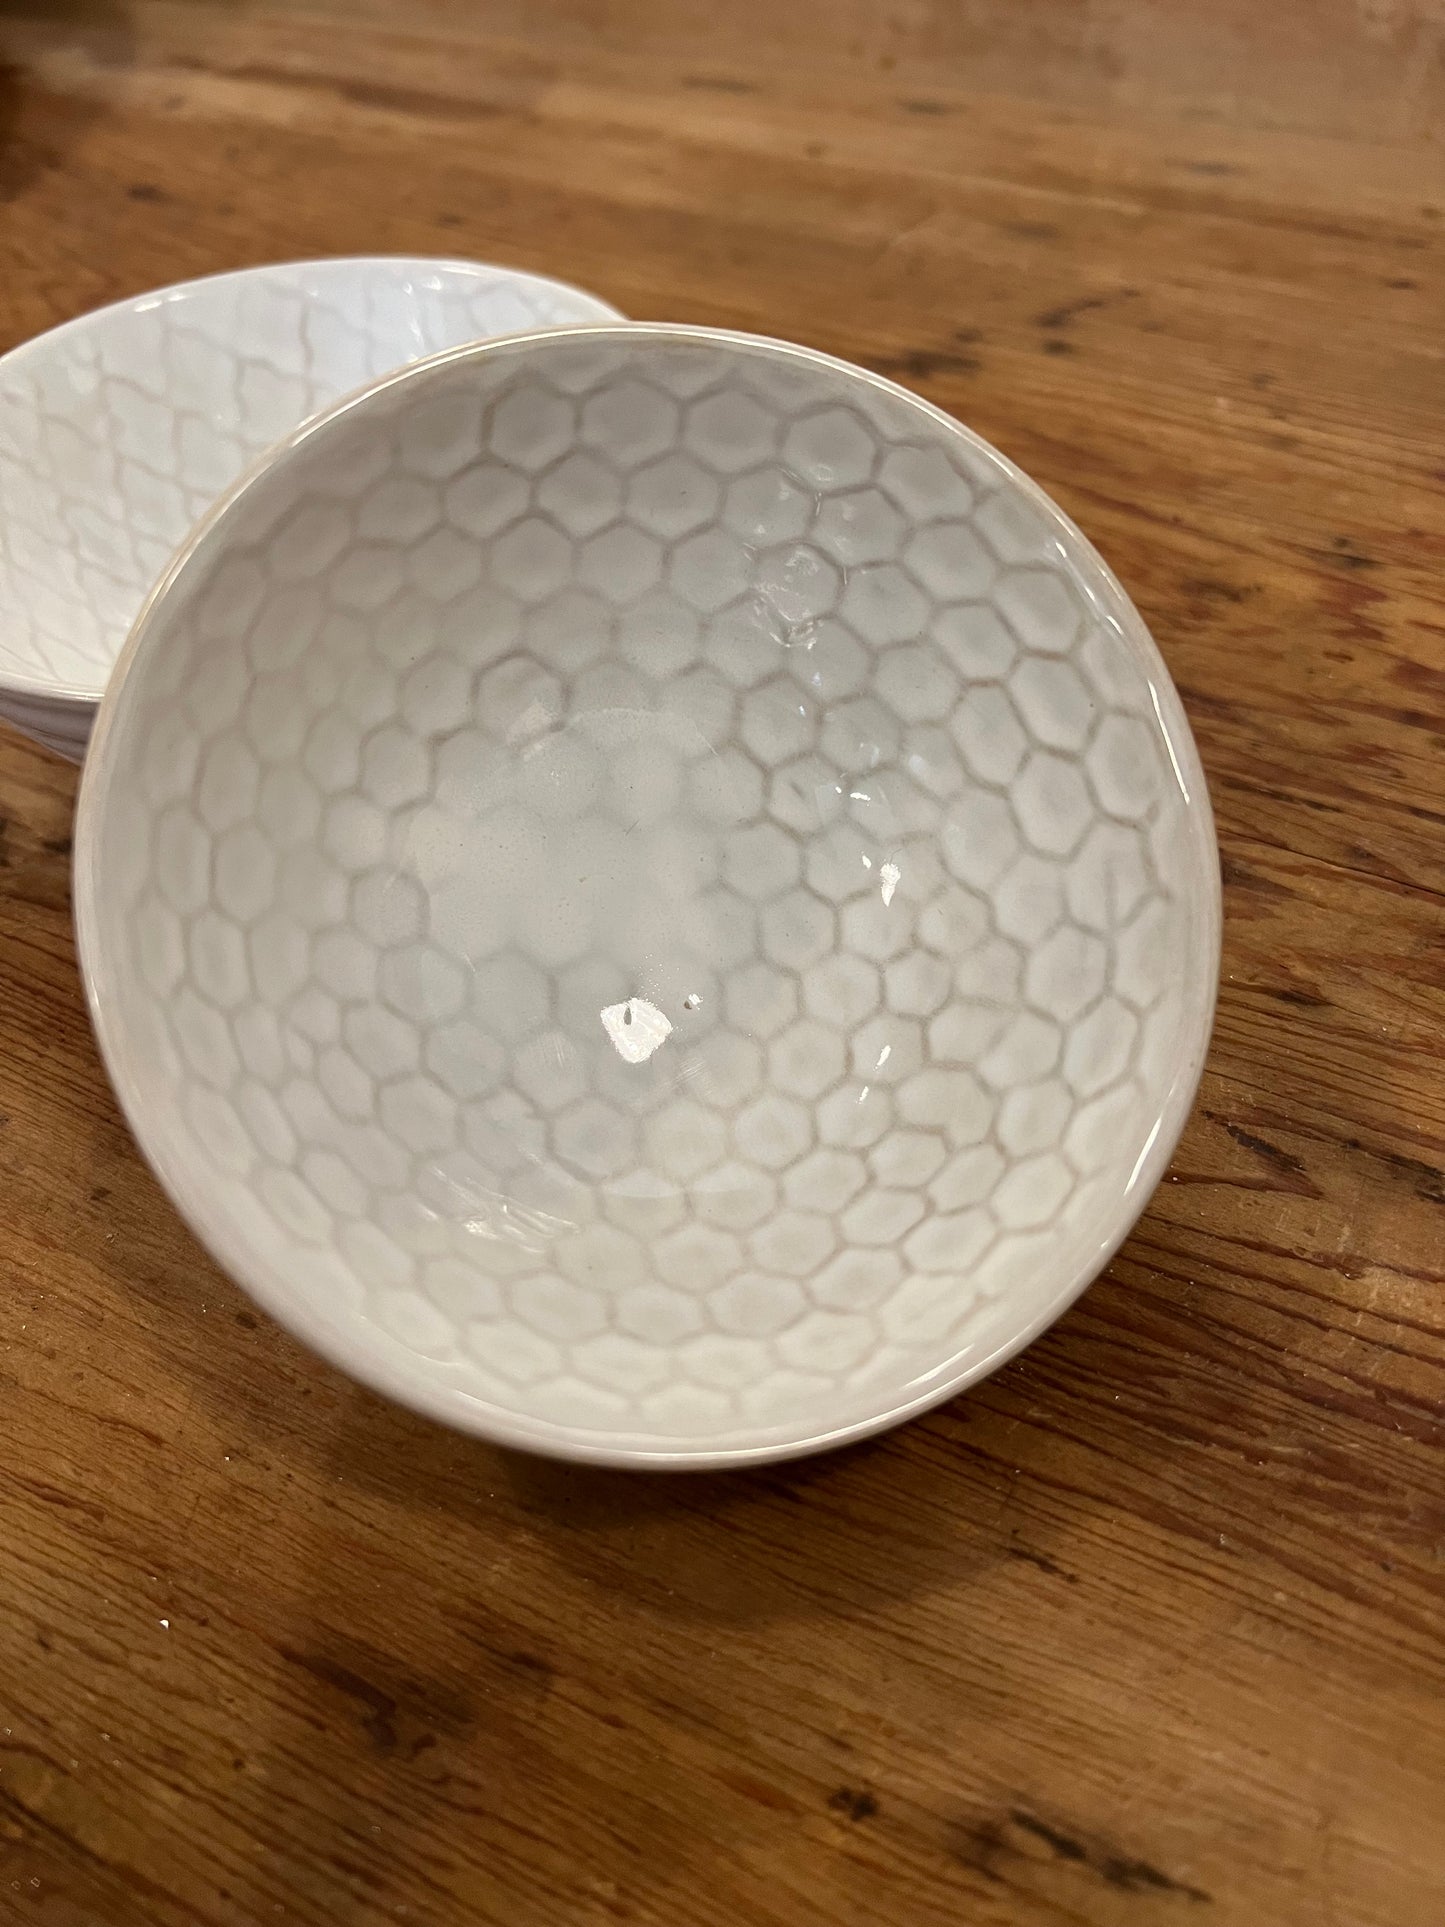 Small White Ceramic Patterned Bowls